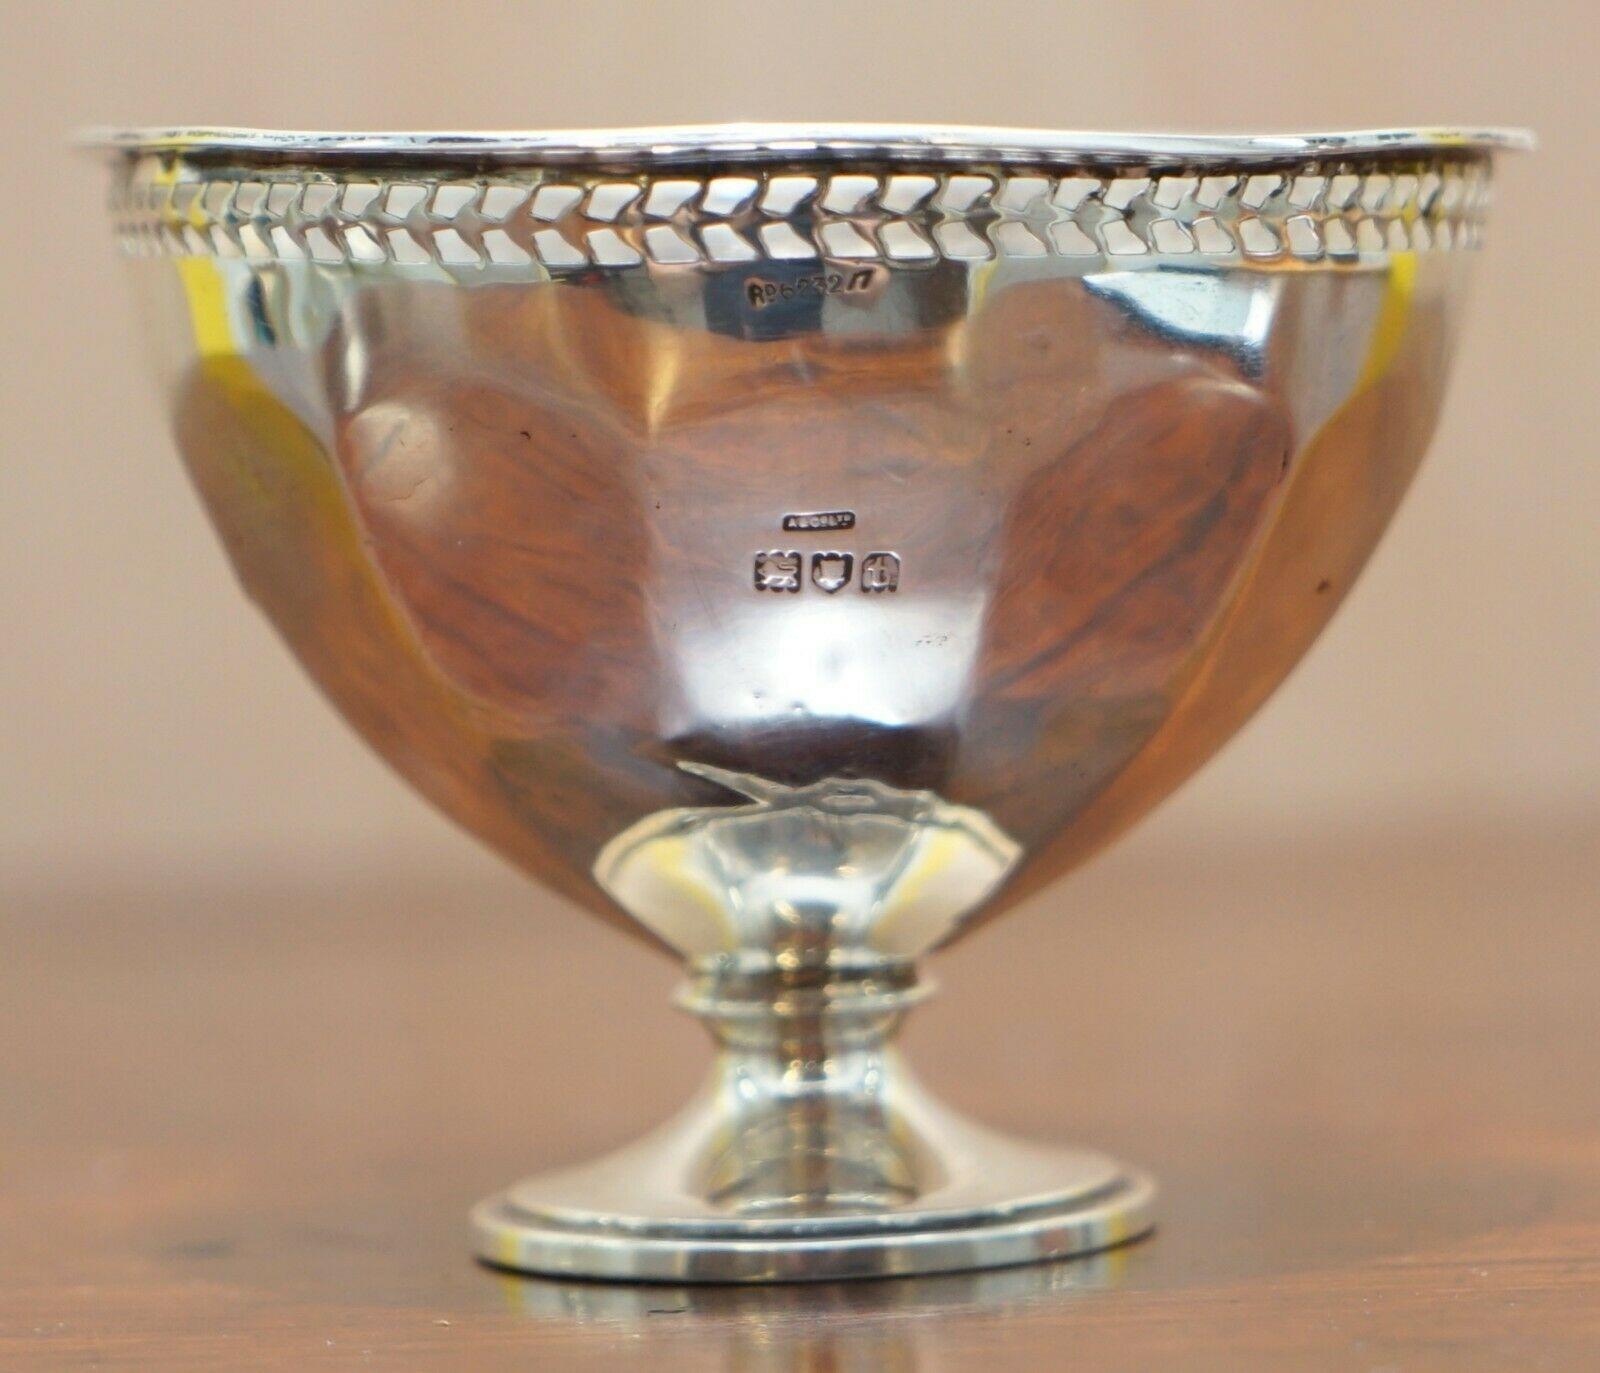 Wimbledon Furniture

We are delighted to offer for sale this stunning Asprey & Co LTD London Sterling silver fully hallmarked bowl

A good looking and decorative little bowl, fully hallmarked with the serial number, then the sideways facing Lion for